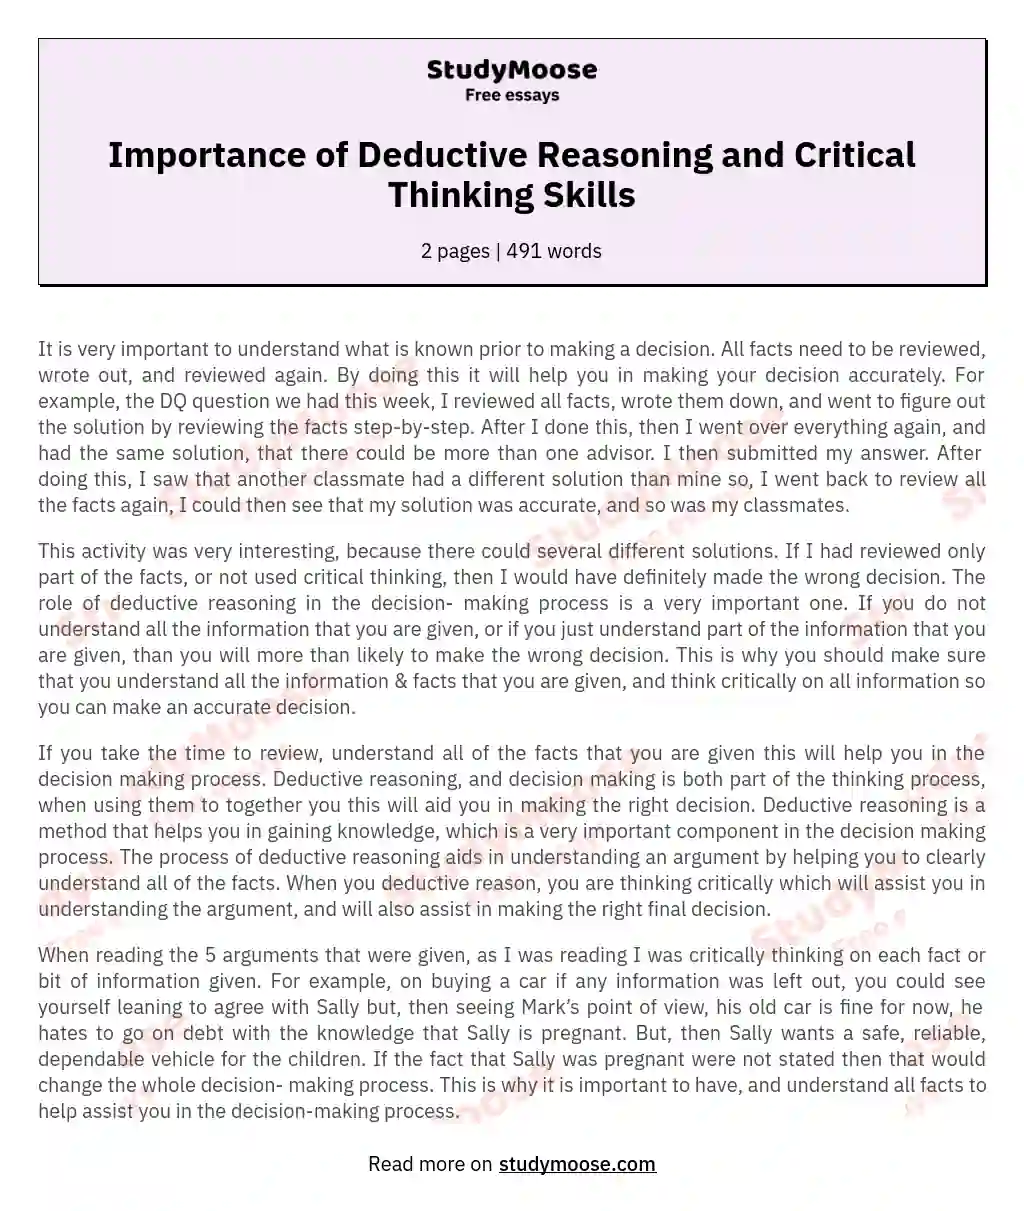 Importance of Deductive Reasoning and Critical Thinking Skills